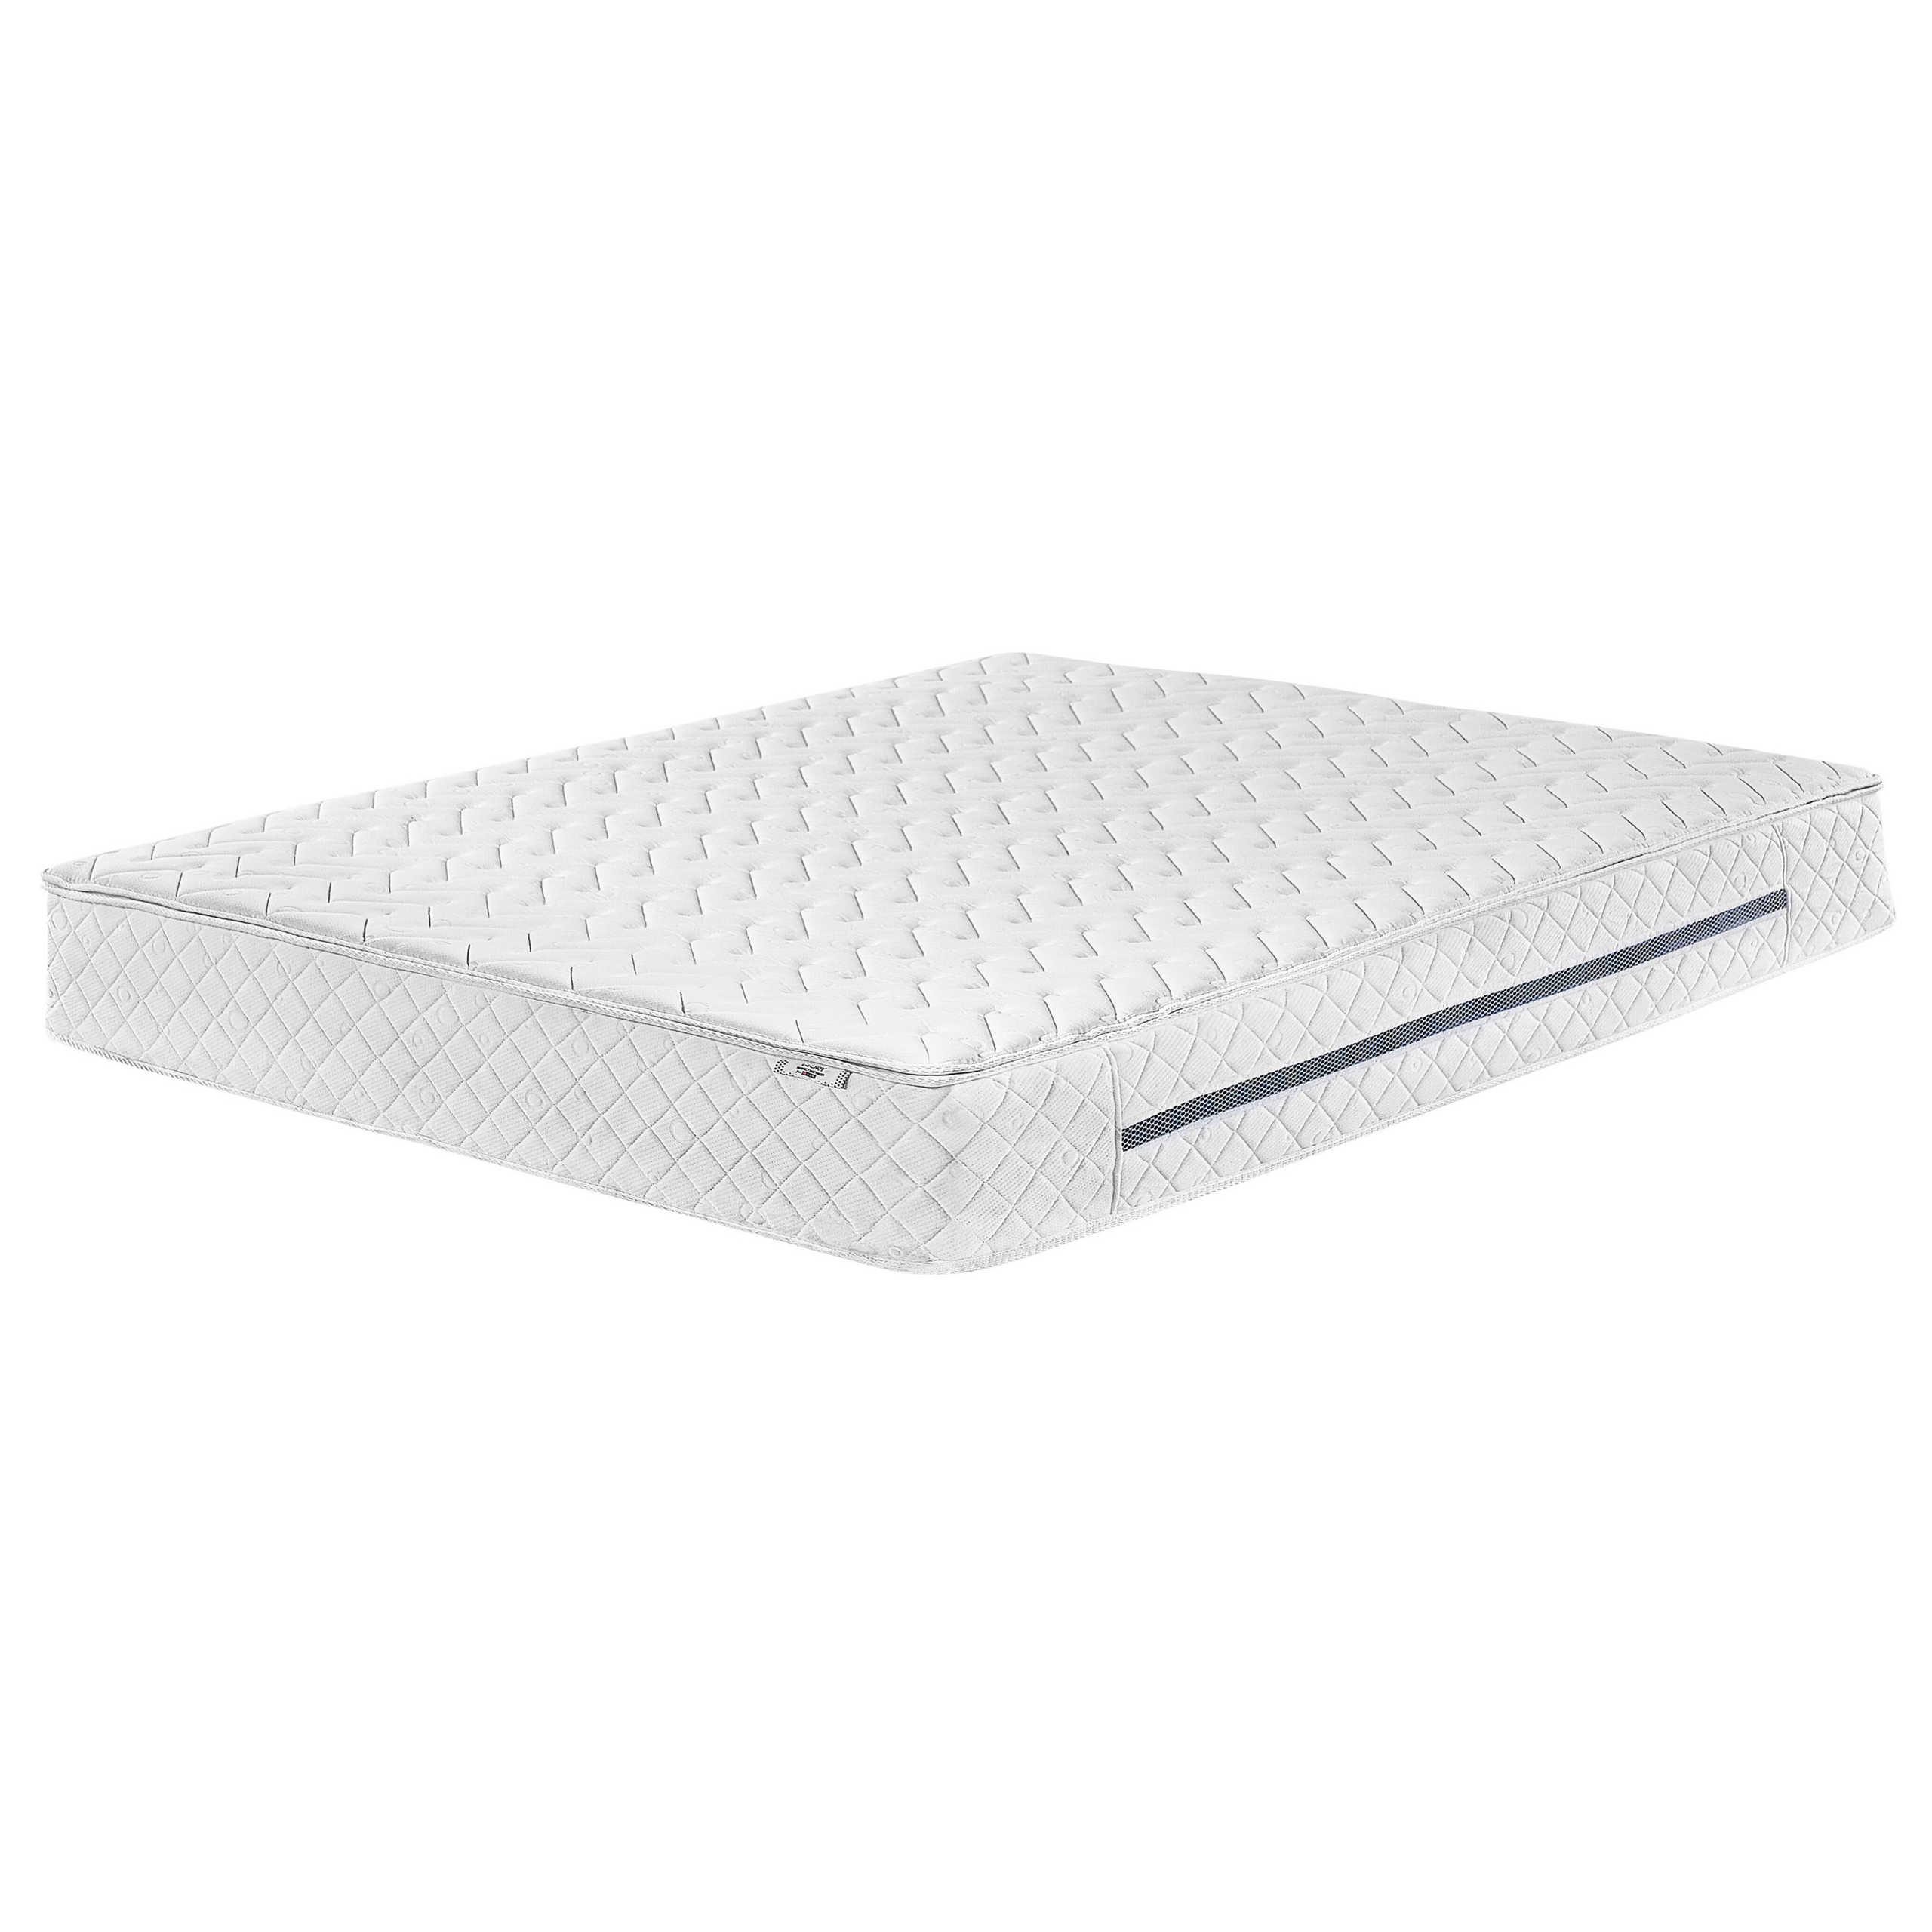 Beliani Pocket Spring Mattress Firm White 160 x 200 cm Polyester with Cooling Memory Foam with Zip